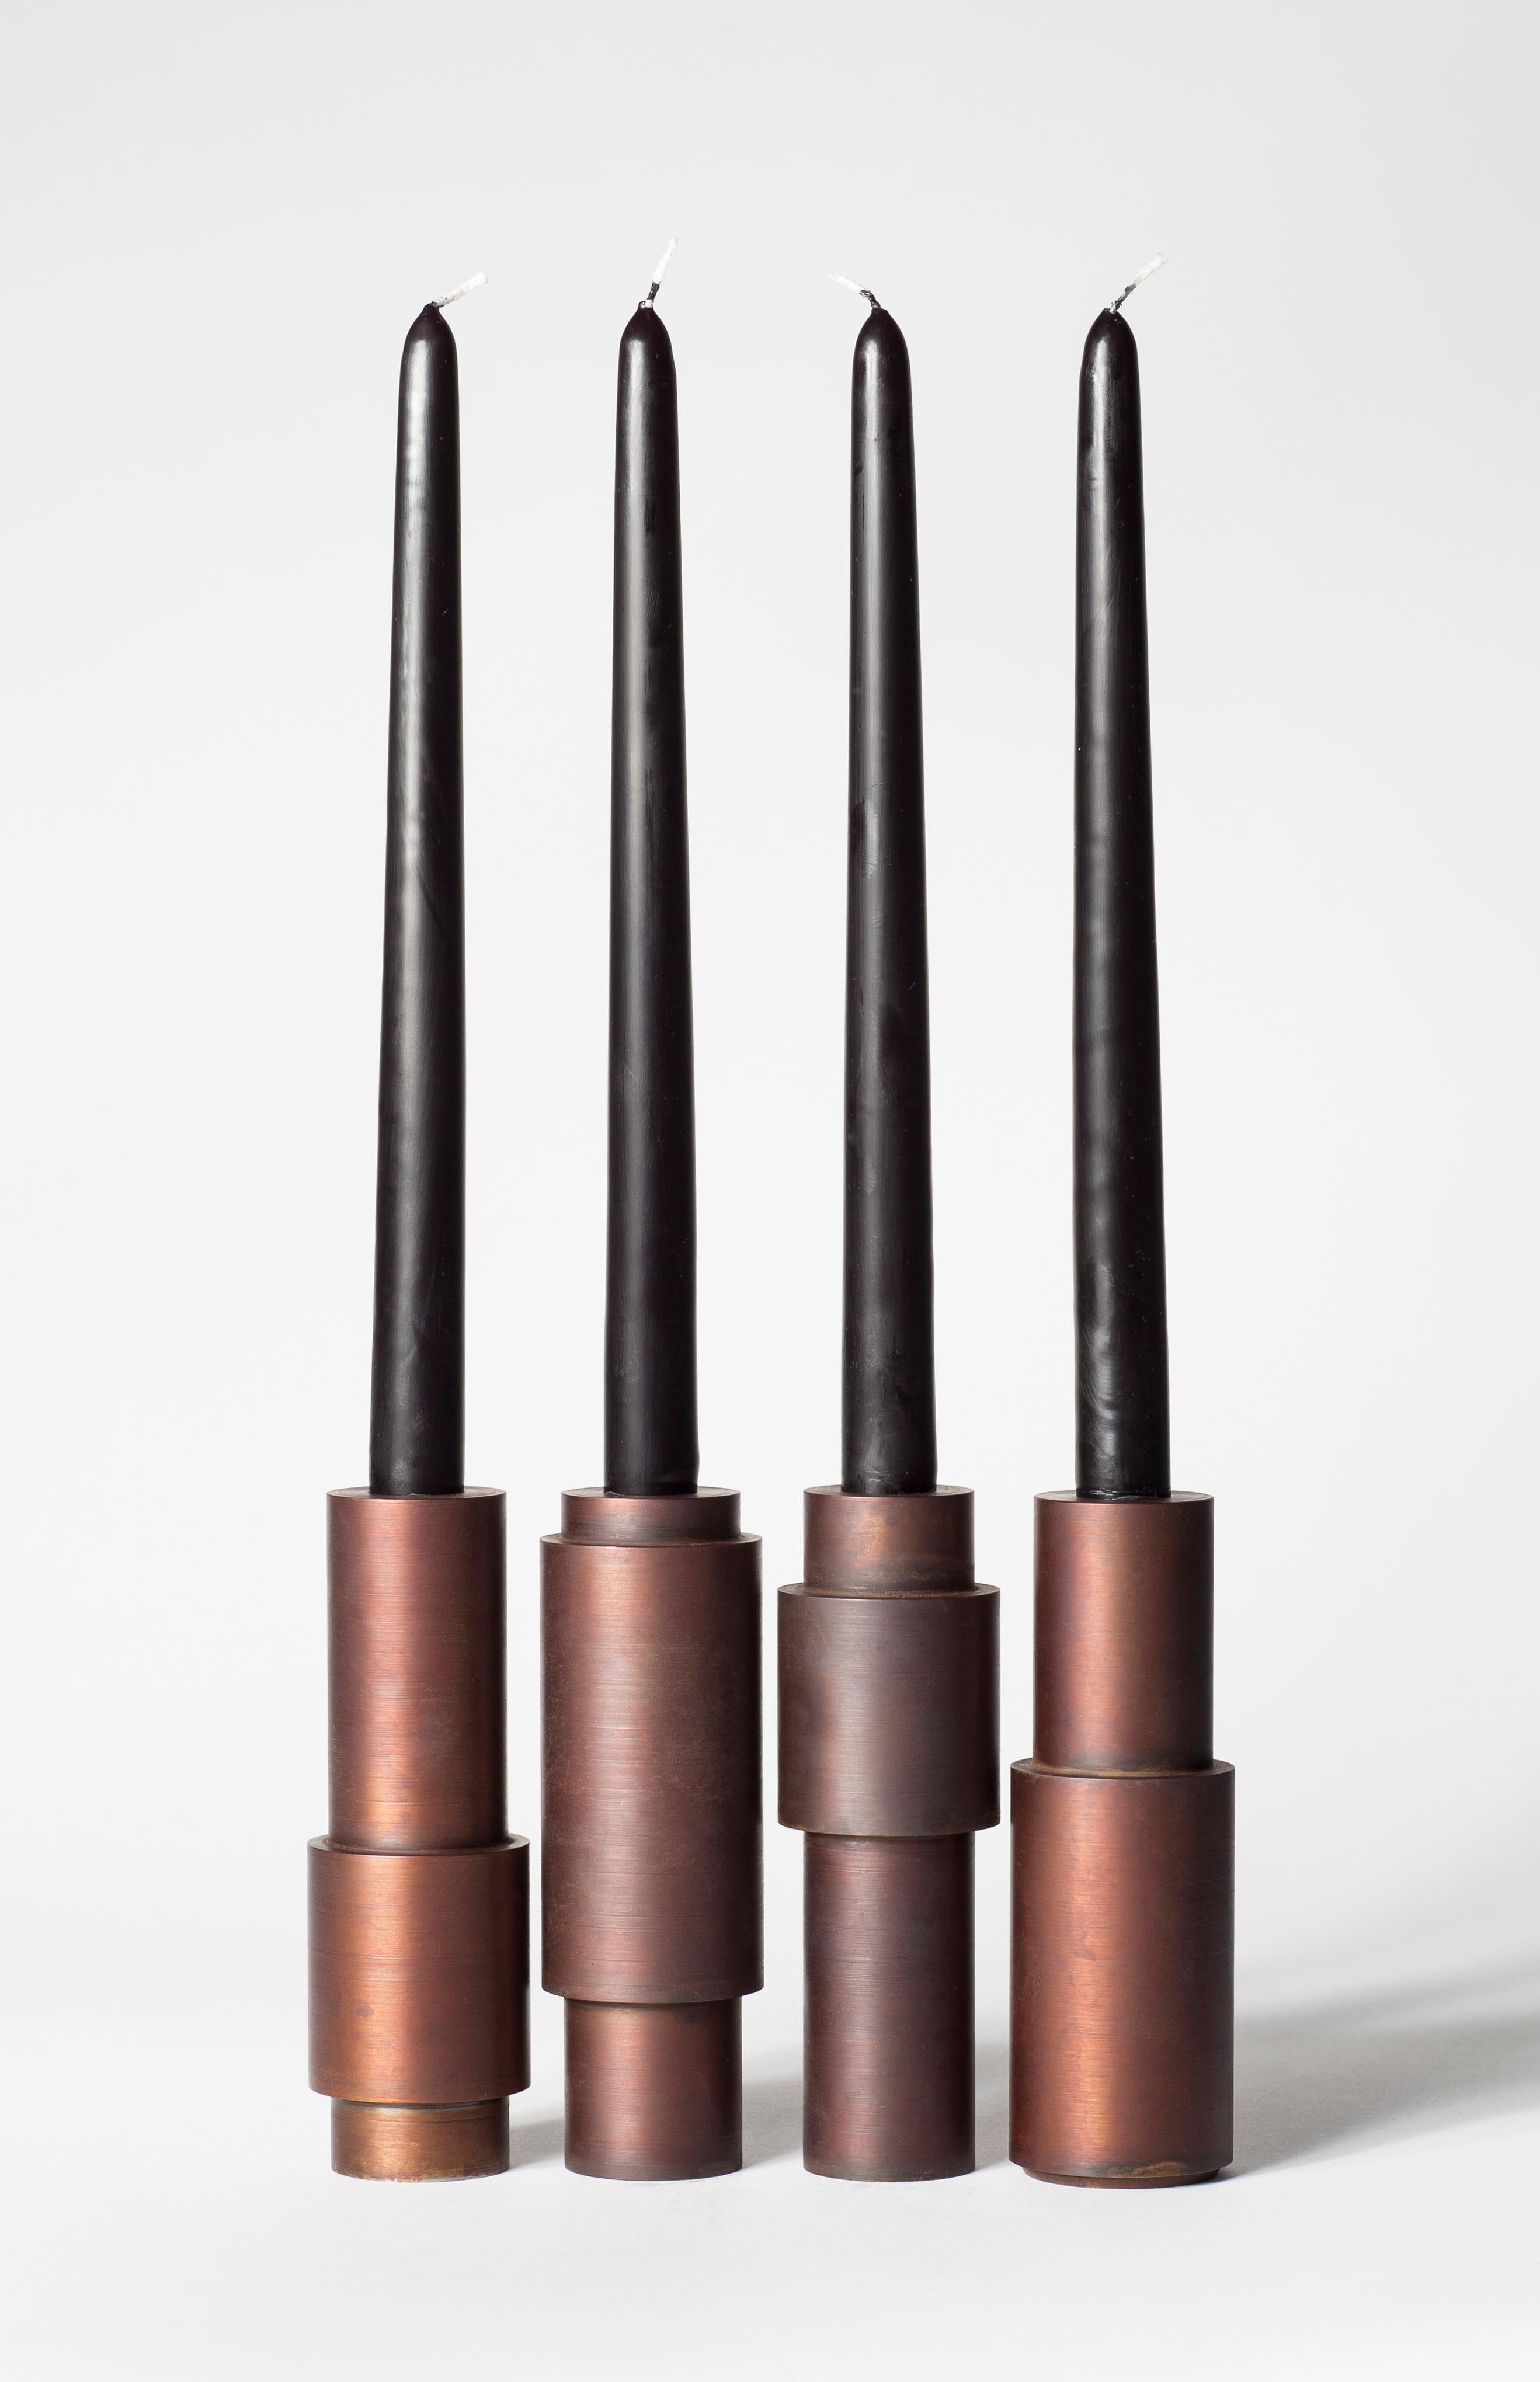 Set of 4 brown patina steel candlestick by Lukasz Friedrich
Dimensions: D 5 x H 15 cm
Materials: Brown patina on steel.